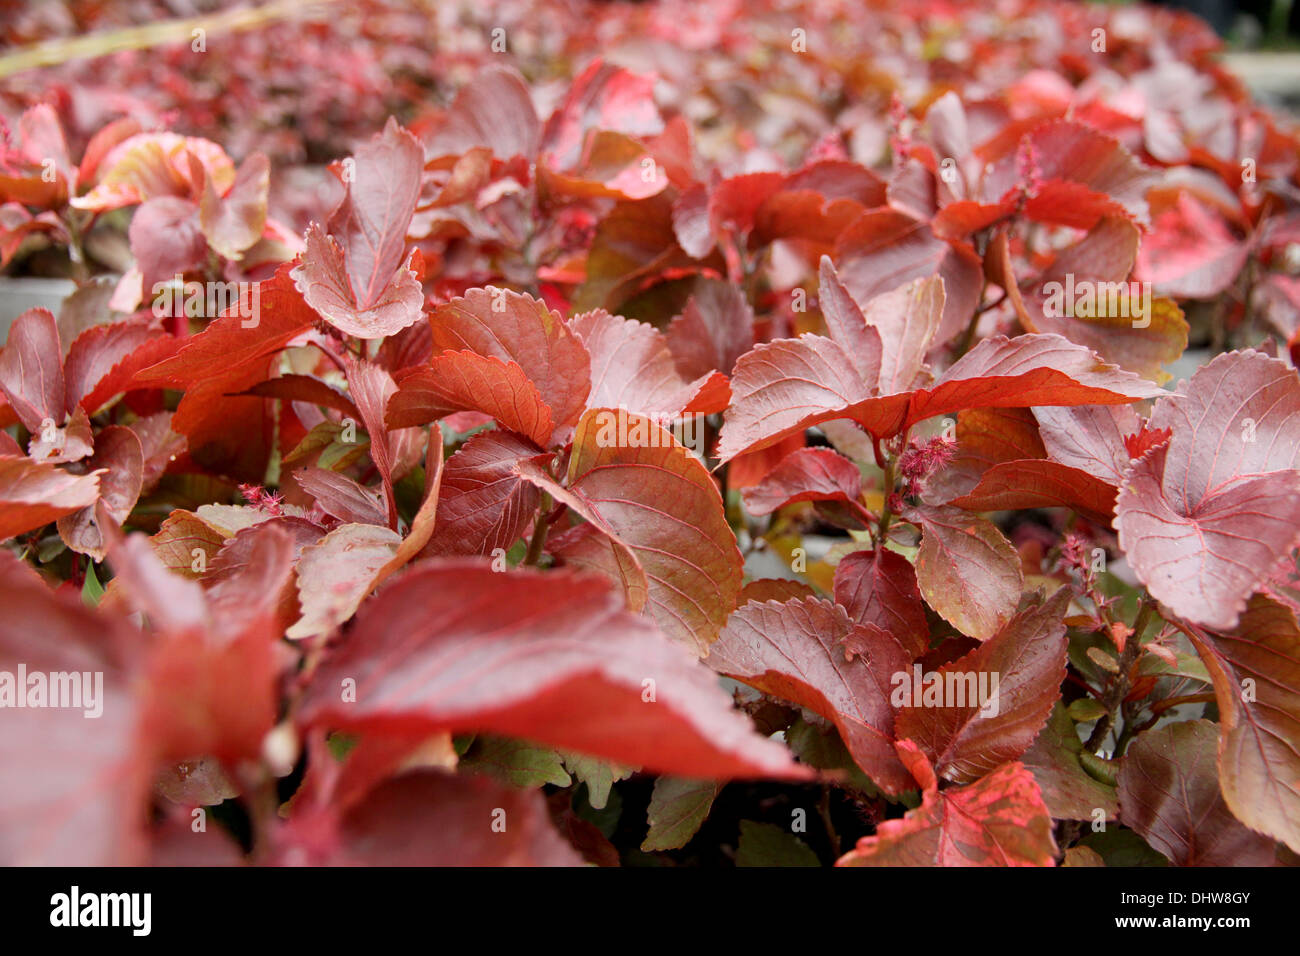 The Red leaves in the garden, it can be a beautiful background. Stock Photo